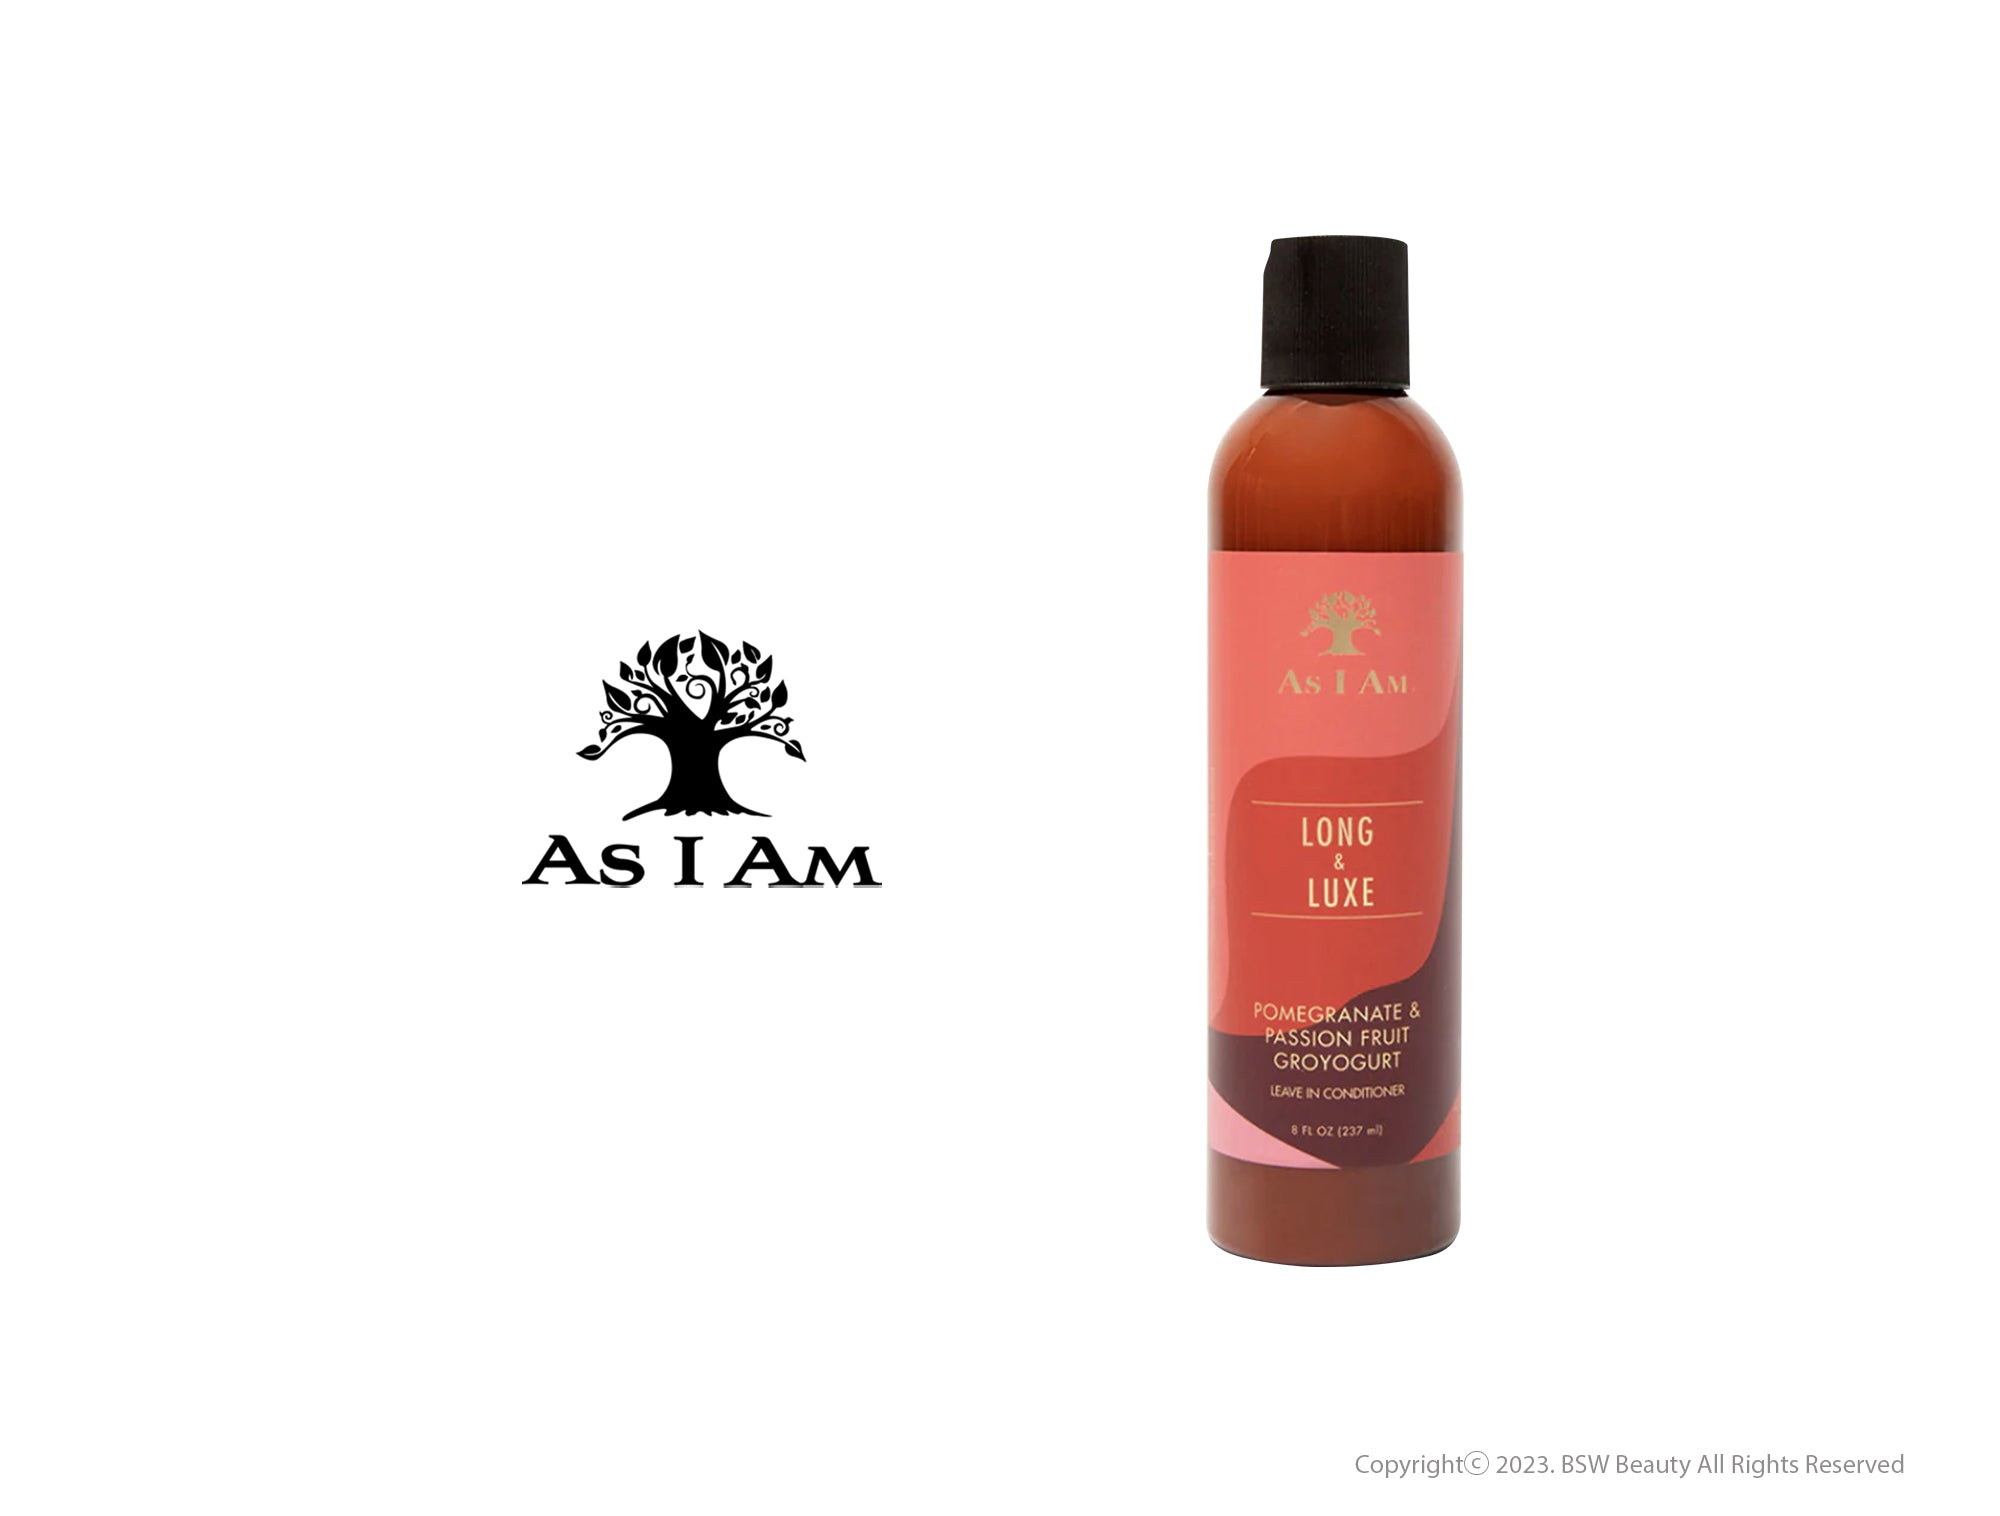 AS I AM LONG AND LUXE POMEGRANATE & PASSION FRUIT GROYOGURT LEAVE-IN CONDITIONER 8oz